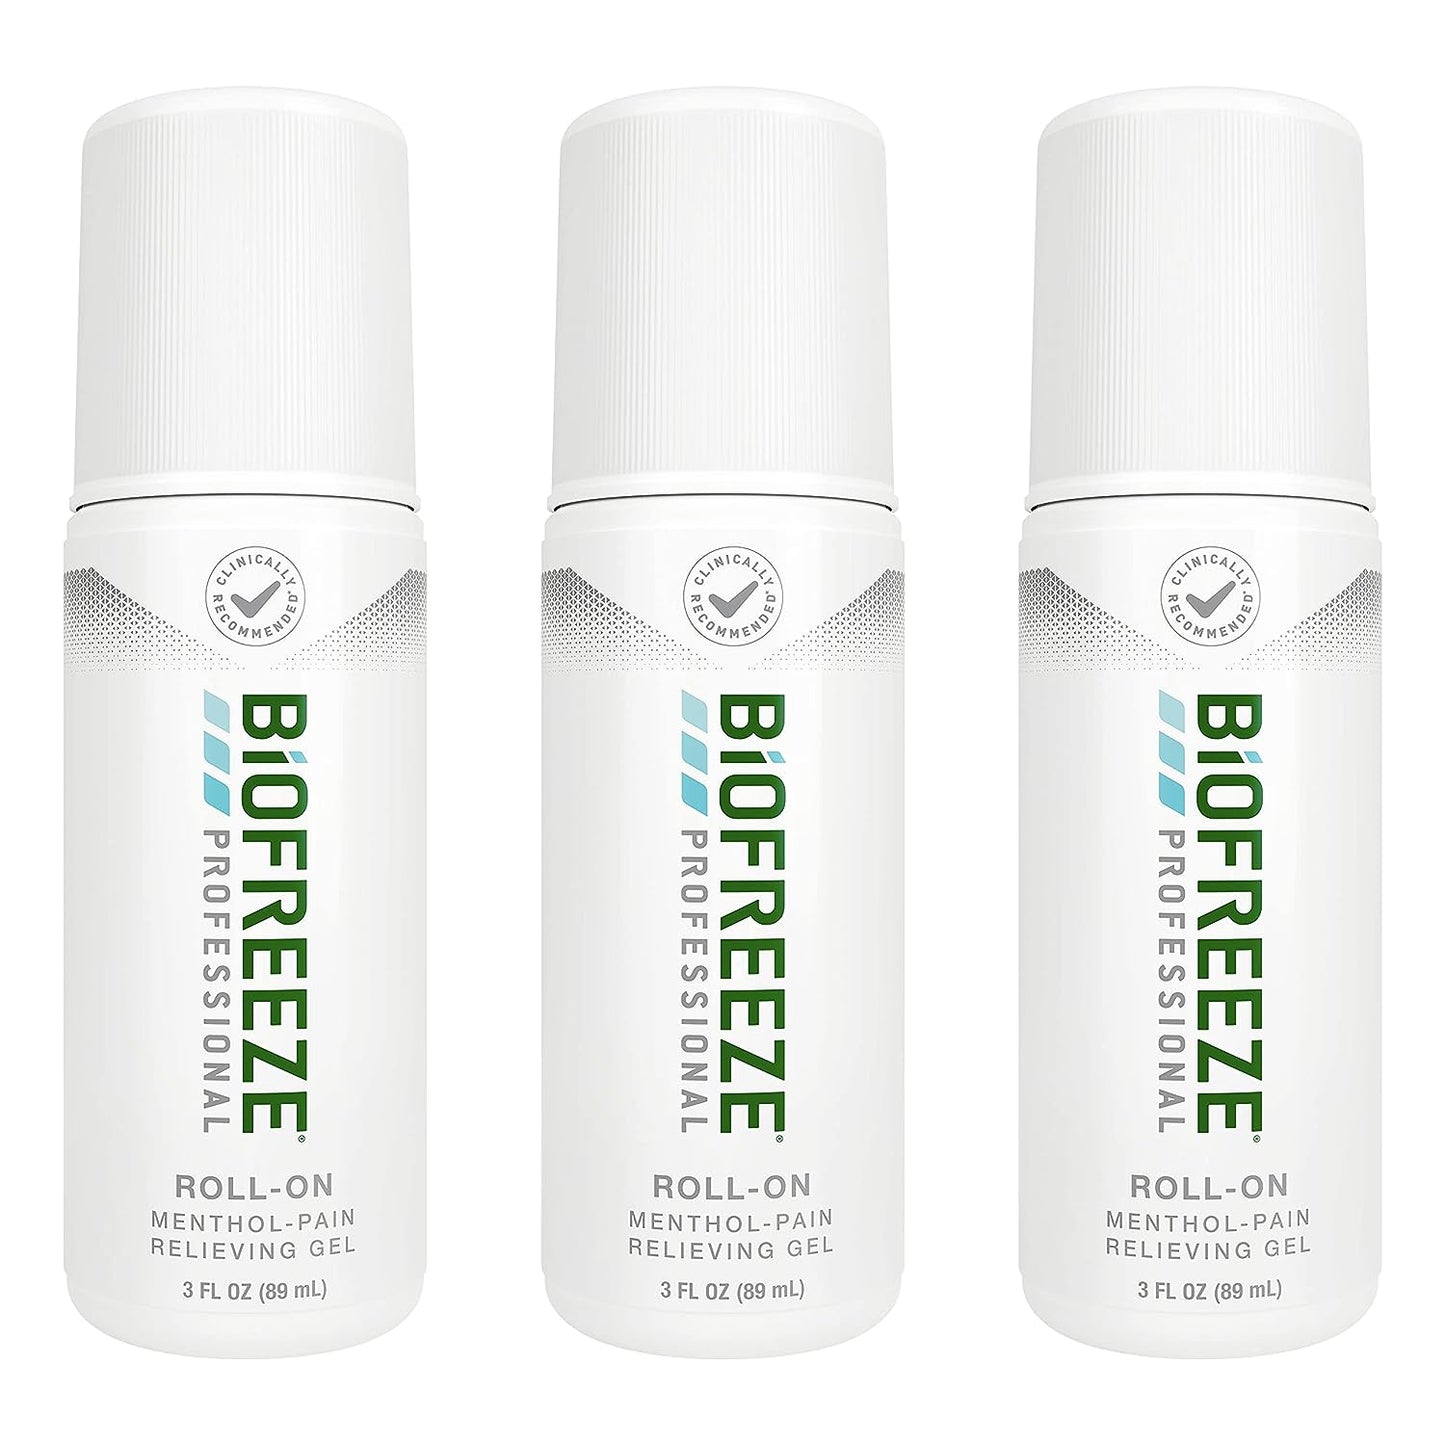 Biofreeze Professional Roll-On Menthol Pain-Relieving Gel 3 FL OZ Green (Pack Of 3)